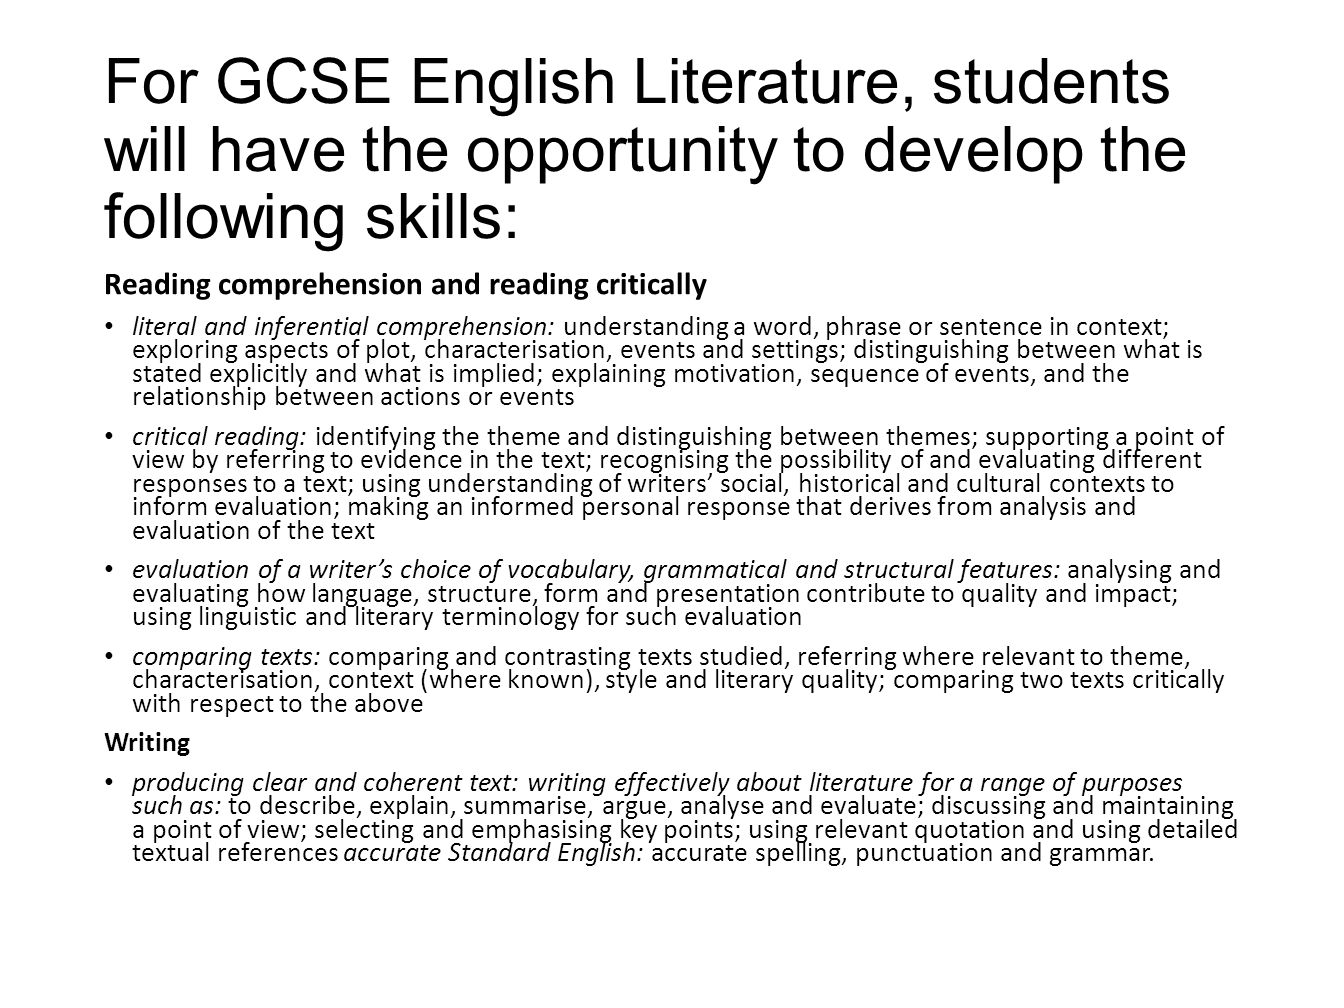 For GCSE English Literature, students will have the opportunity to develop the following skills: Reading comprehension and reading critically literal and inferential comprehension: understanding a word, phrase or sentence in context; exploring aspects of plot, characterisation, events and settings; distinguishing between what is stated explicitly and what is implied; explaining motivation, sequence of events, and the relationship between actions or events critical reading: identifying the theme and distinguishing between themes; supporting a point of view by referring to evidence in the text; recognising the possibility of and evaluating different responses to a text; using understanding of writers’ social, historical and cultural contexts to inform evaluation; making an informed personal response that derives from analysis and evaluation of the text evaluation of a writer’s choice of vocabulary, grammatical and structural features: analysing and evaluating how language, structure, form and presentation contribute to quality and impact; using linguistic and literary terminology for such evaluation comparing texts: comparing and contrasting texts studied, referring where relevant to theme, characterisation, context (where known), style and literary quality; comparing two texts critically with respect to the above Writing producing clear and coherent text: writing effectively about literature for a range of purposes such as: to describe, explain, summarise, argue, analyse and evaluate; discussing and maintaining a point of view; selecting and emphasising key points; using relevant quotation and using detailed textual references accurate Standard English: accurate spelling, punctuation and grammar.